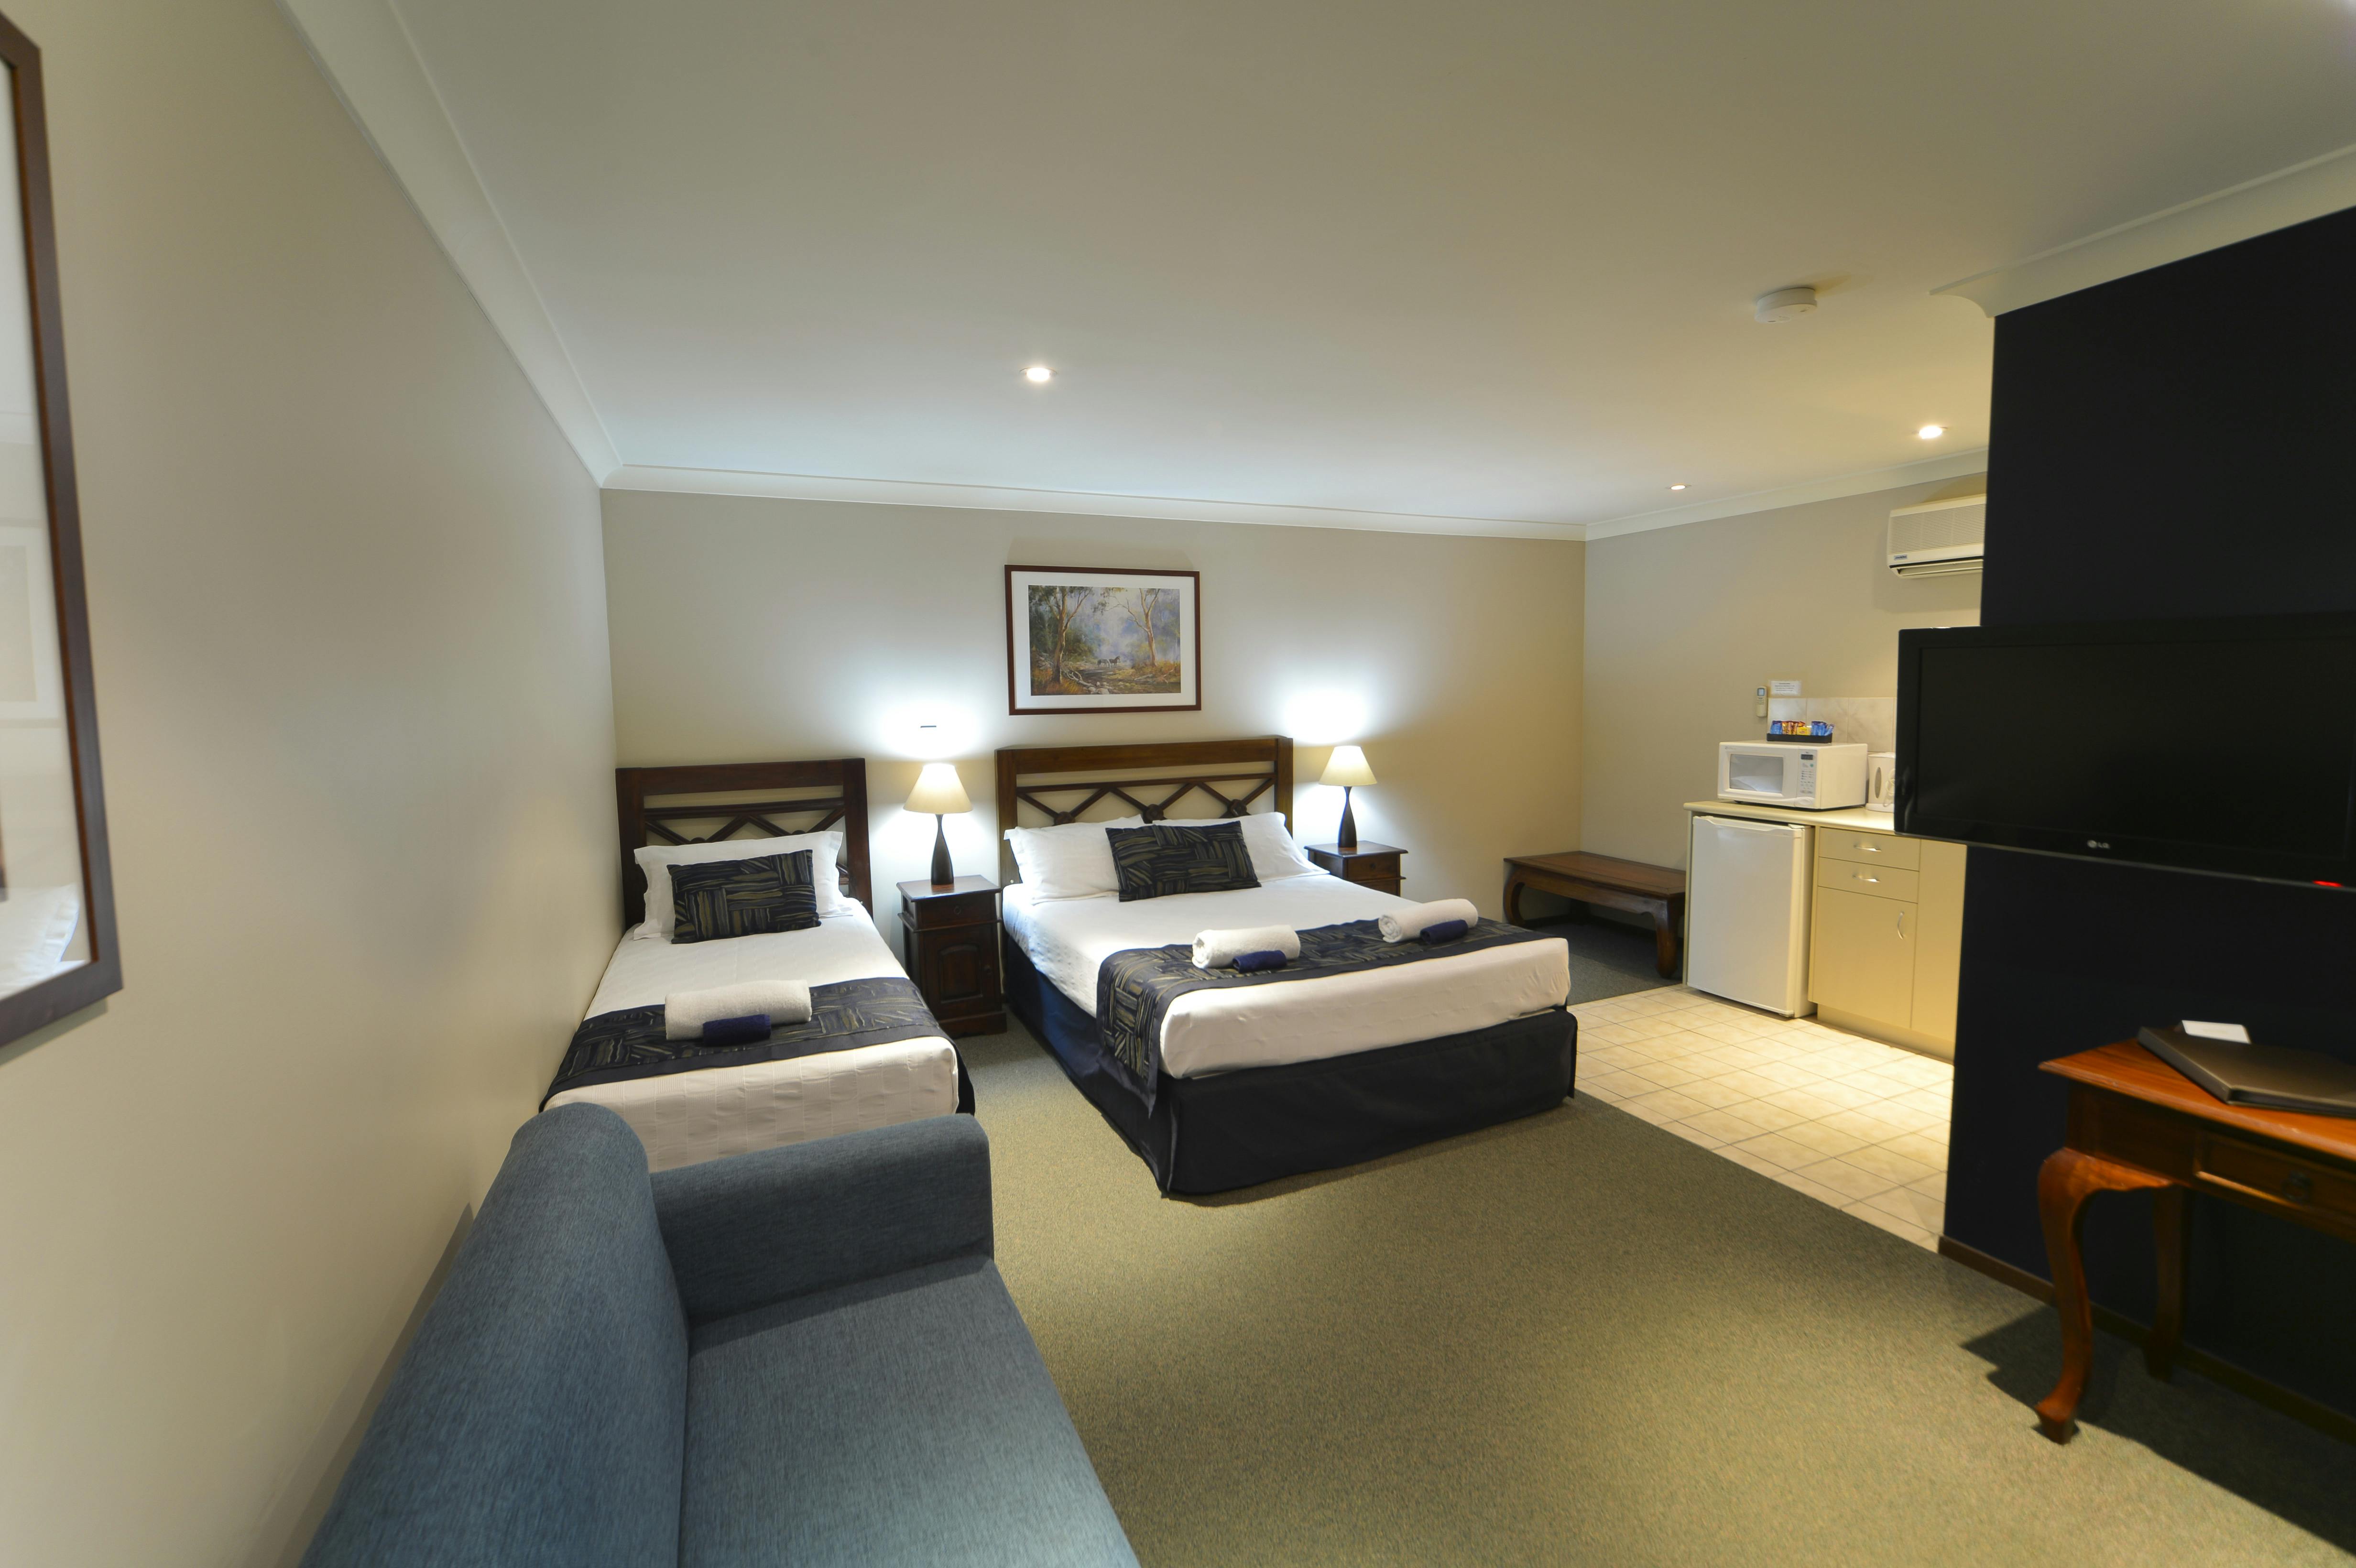 Ground floor rooms located near Perth Airport